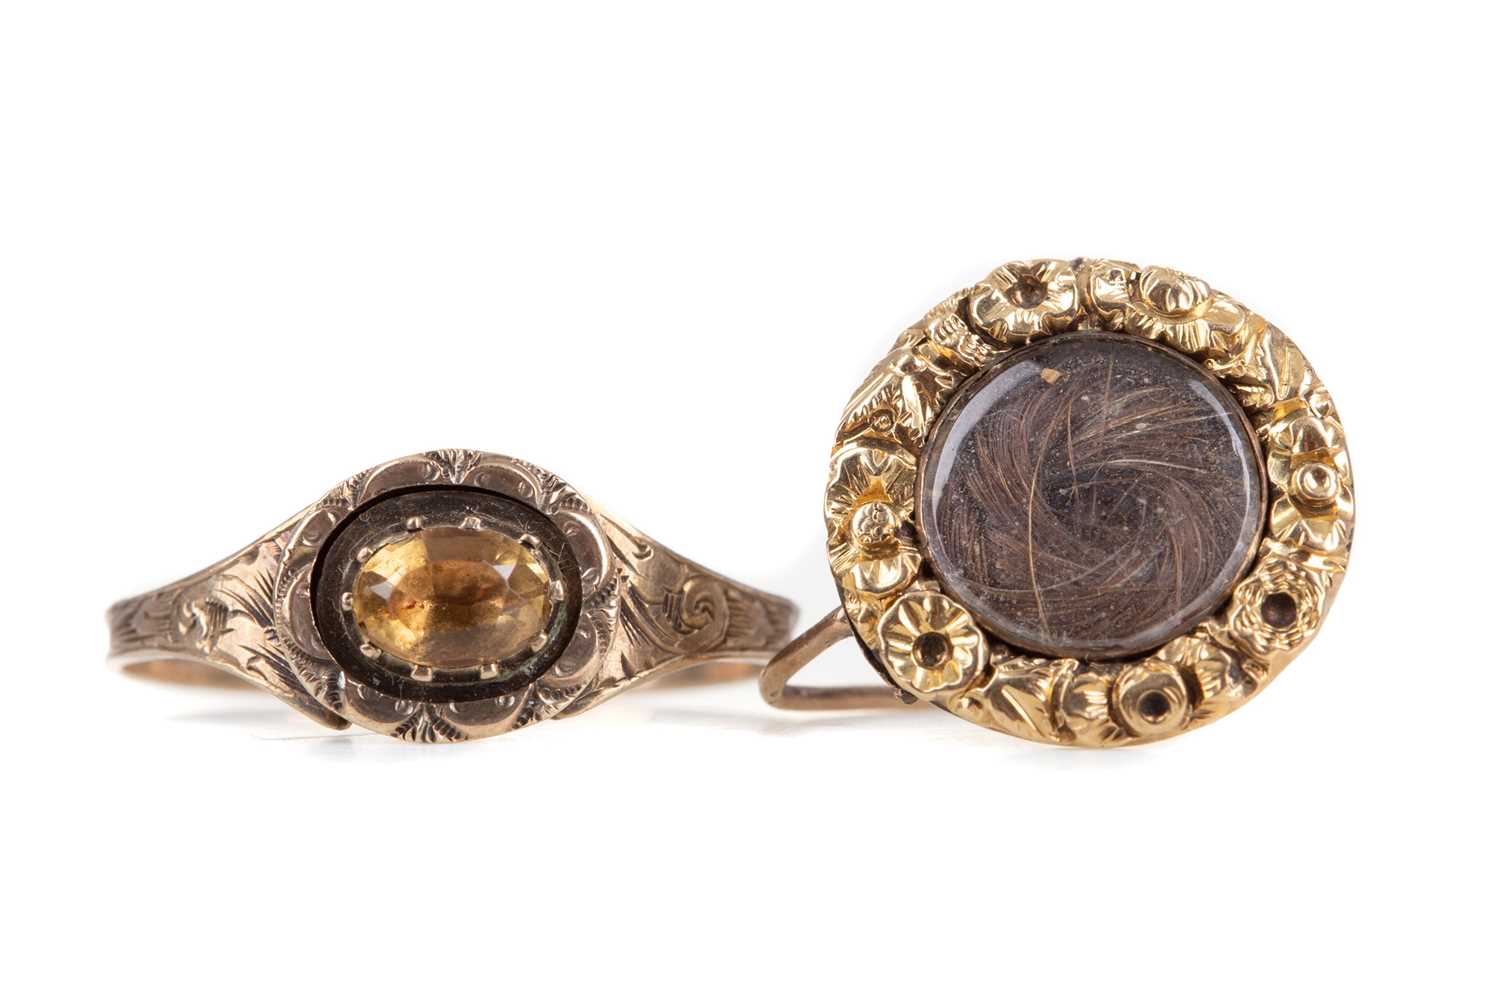 Lot 492 - A GEORGIAN RING ALONG WITH A VICTORIAN HAIRWORK MOURNING BROOCH